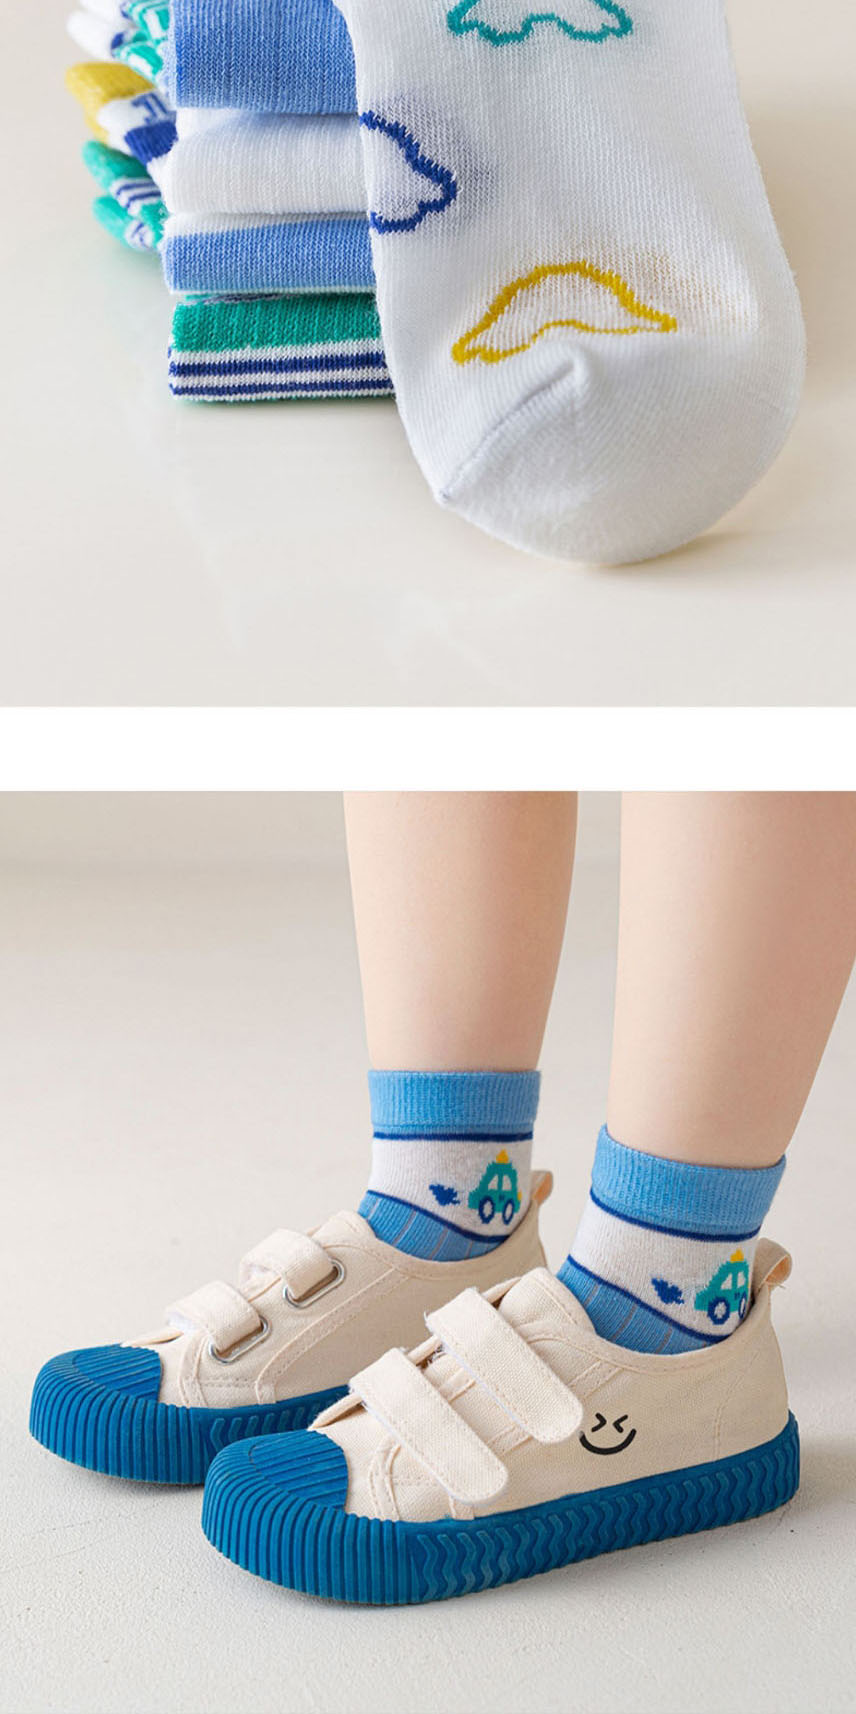 Fashion Trendy Smiling Face [5 Pairs Of Soft And Thin Cotton] Cotton Printed Breathable Mesh Kids Socks,Fashion Socks